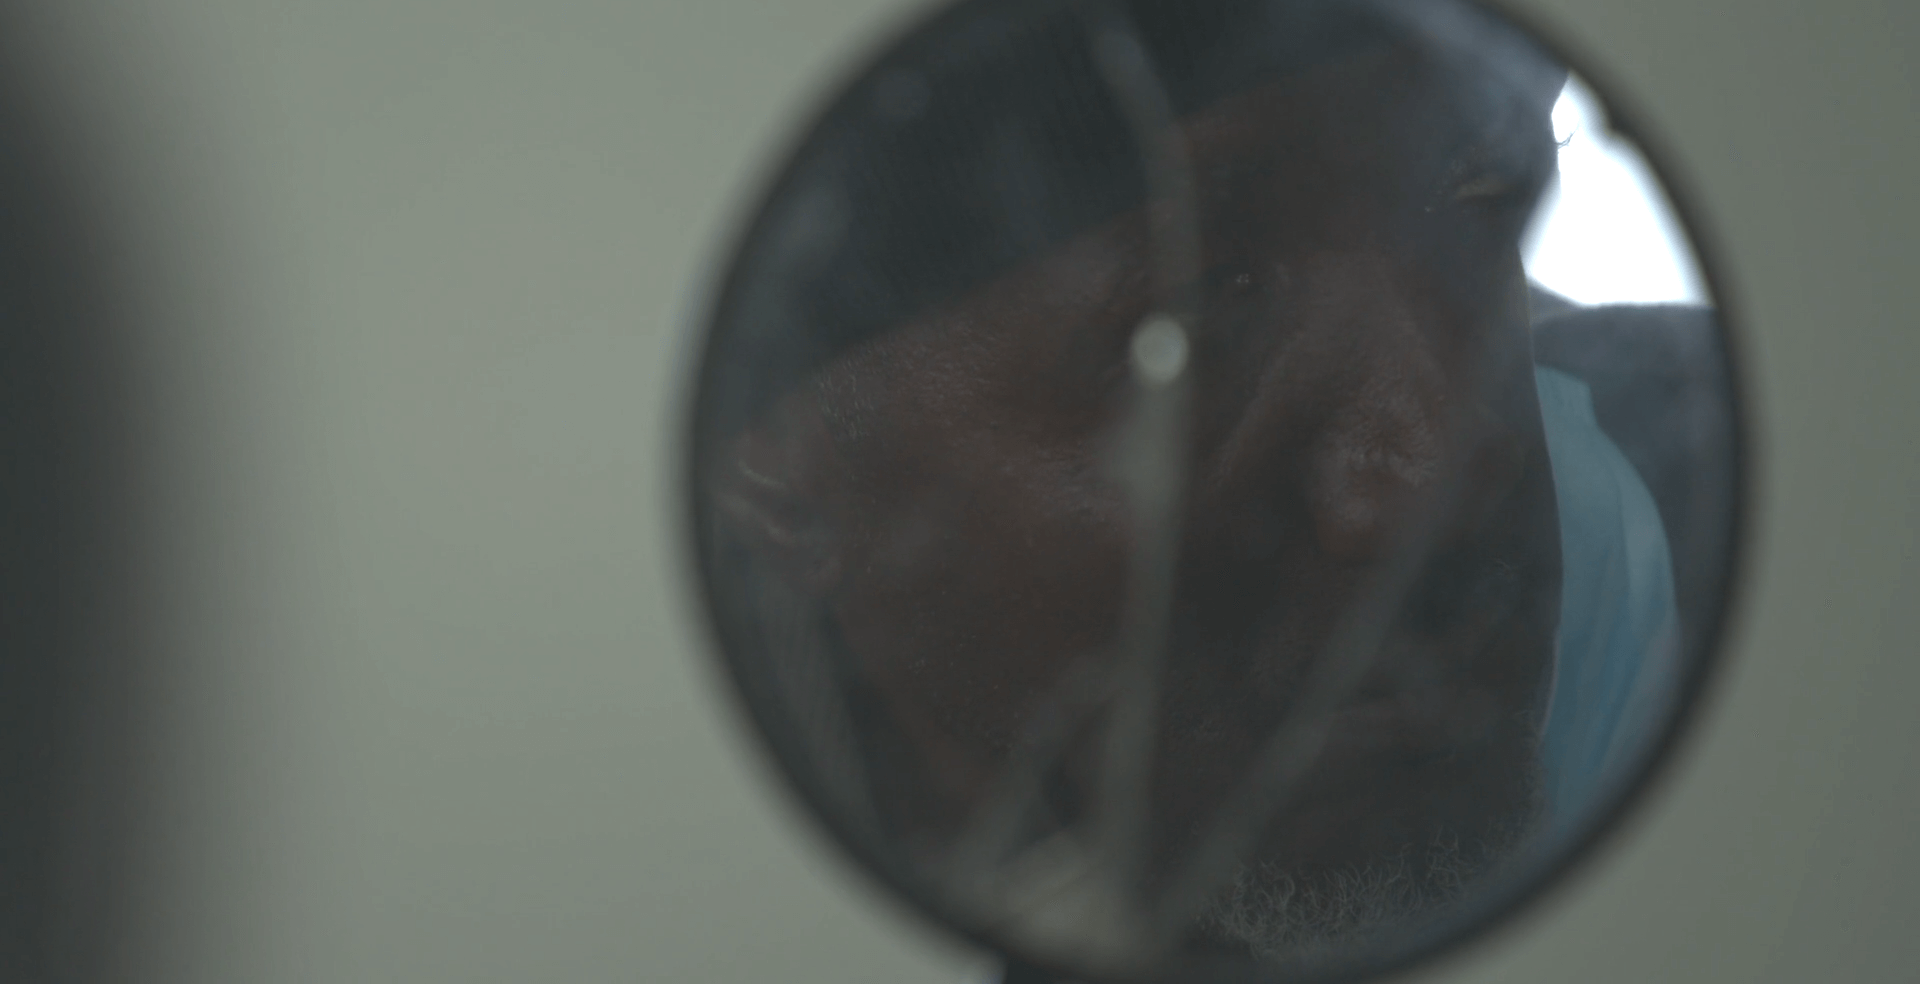 In this still from the film "after angola," a indeterminate shape is partially visible through a circular lens. The image is dimly lit and out of focus so that the details aren't clear.